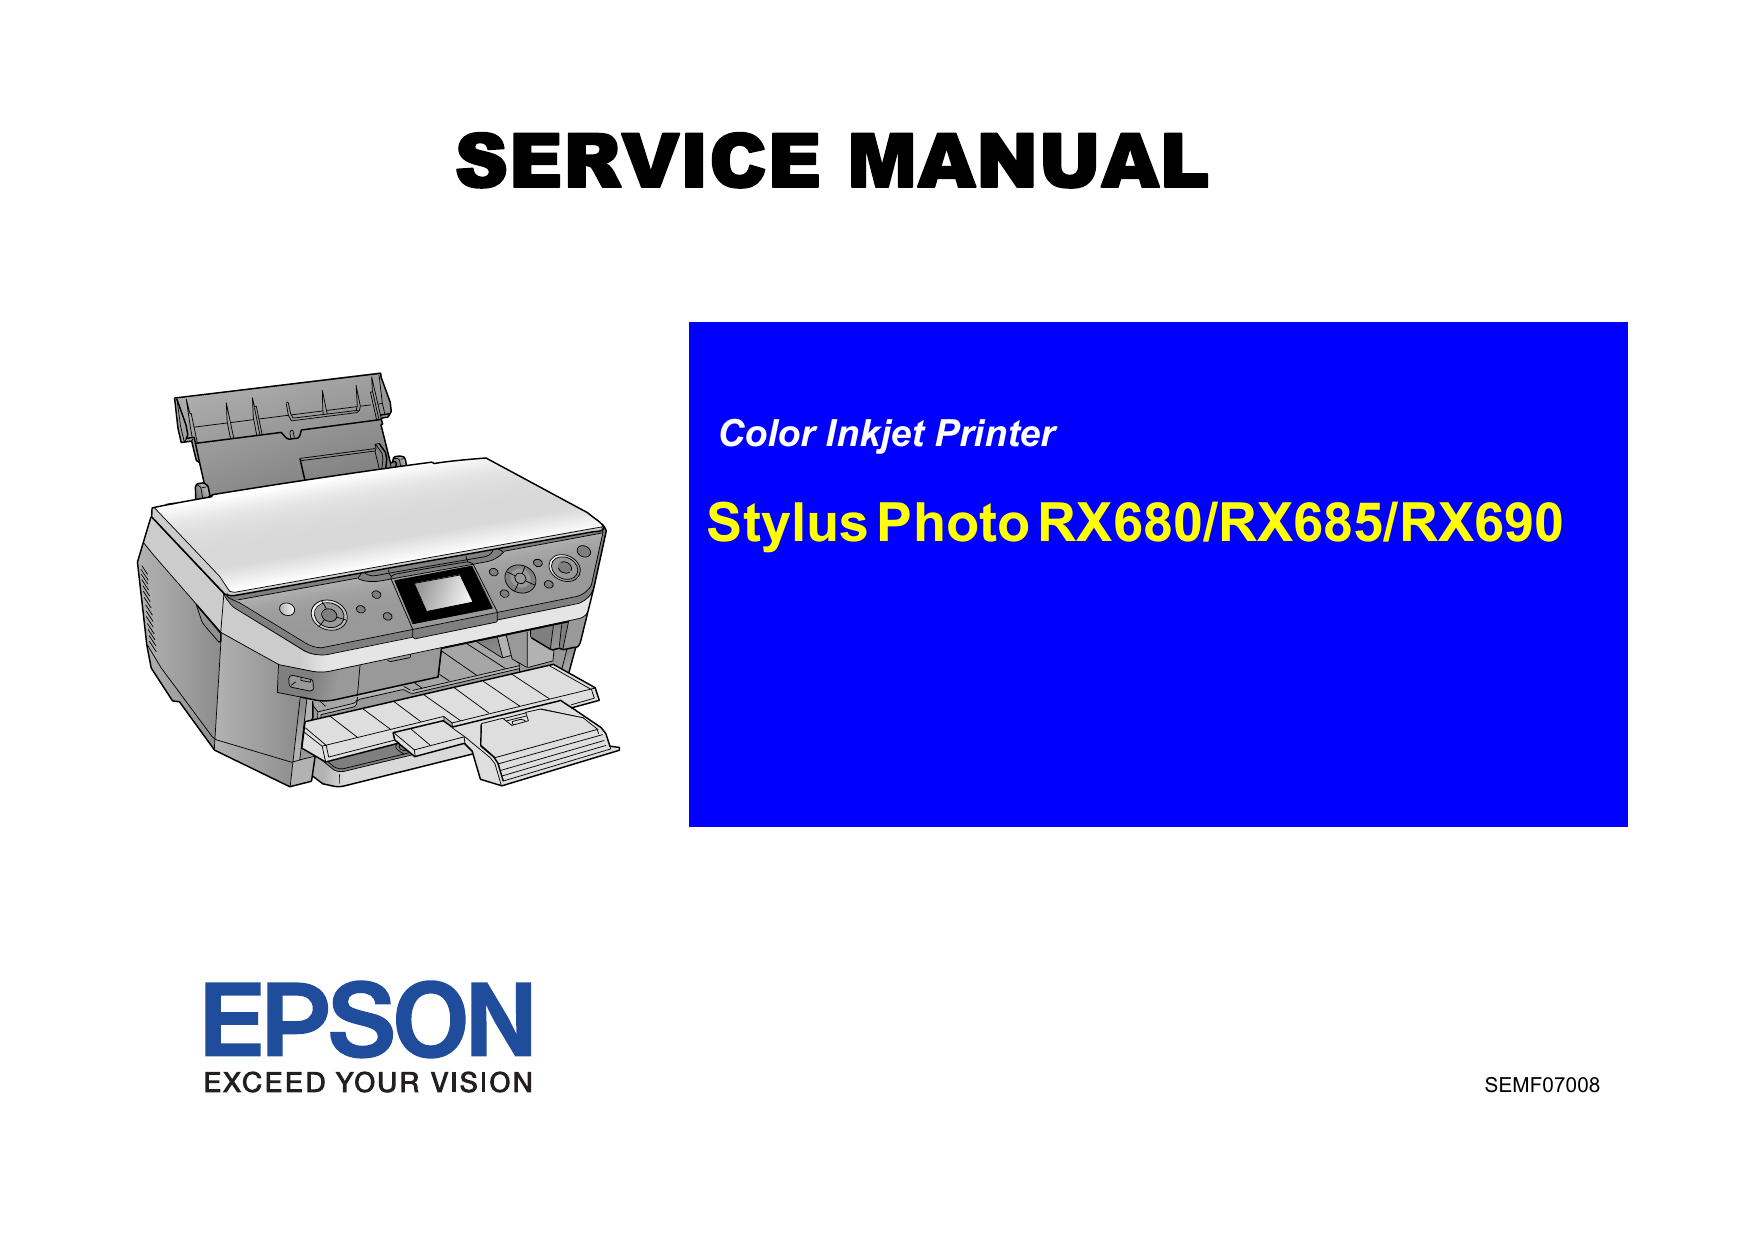 Epson Stylus Photo RX685, RX690 multifunction inkjet printers service guide Preview image 6